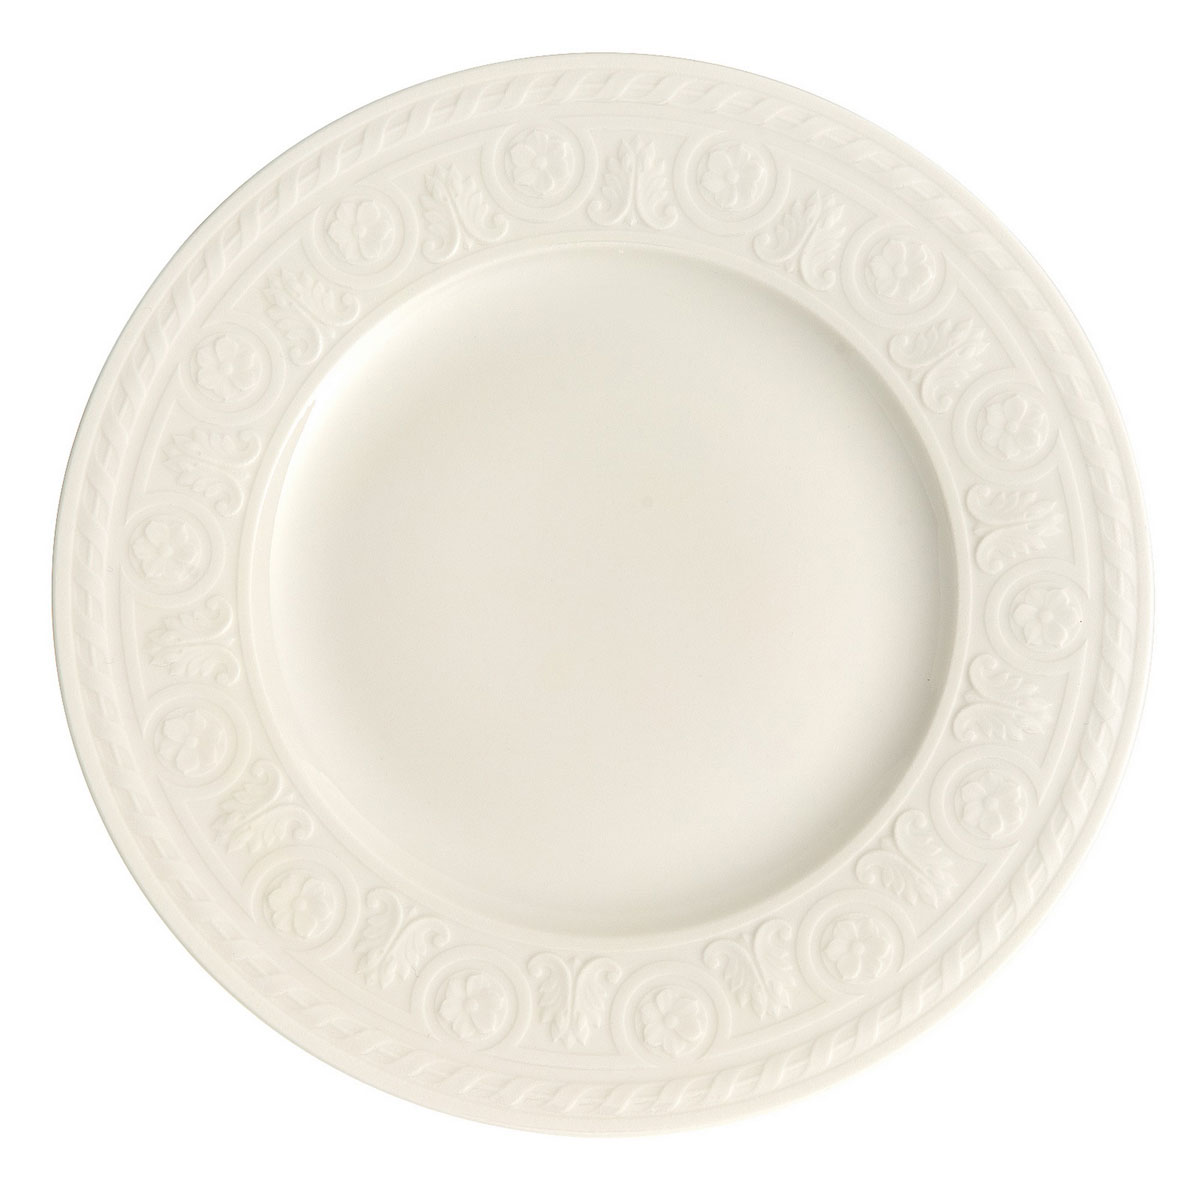 Villeroy and Boch Cellini Salad Plate